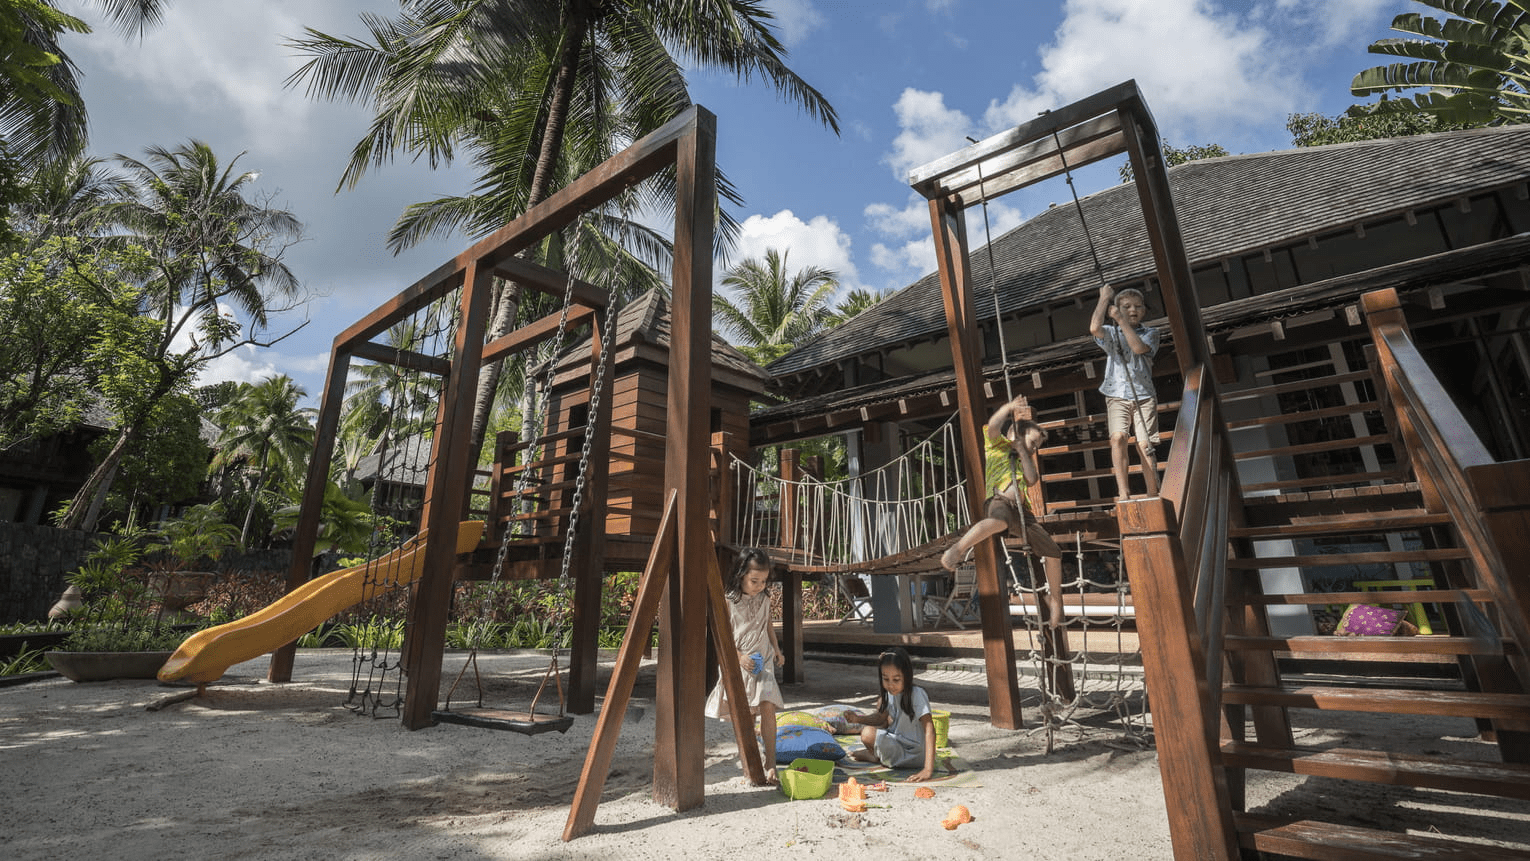 Hotels with Kids Clubs - outdoor adventure playground